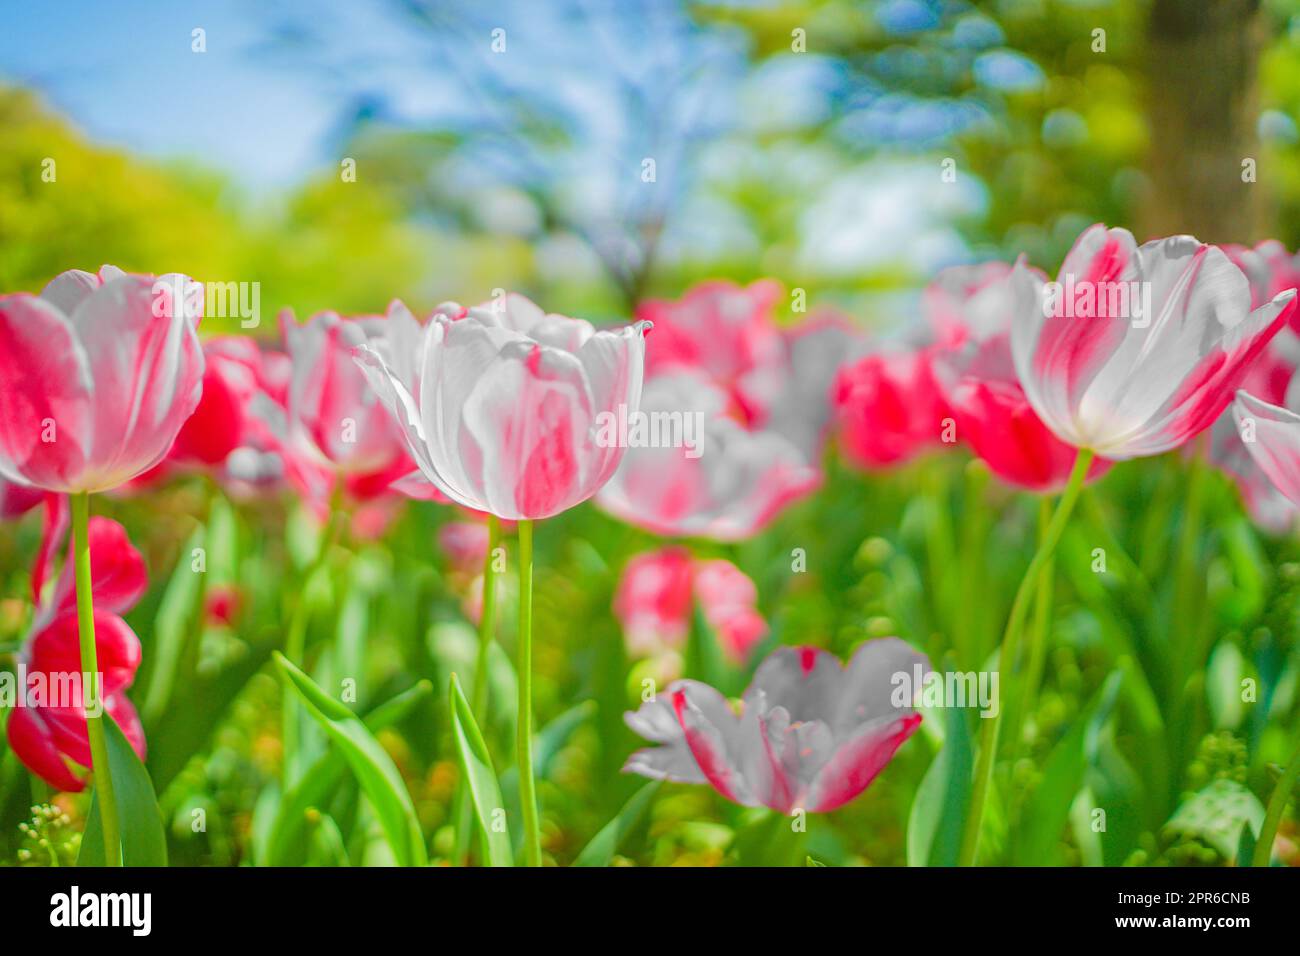 Lots of pink tulips Stock Photo